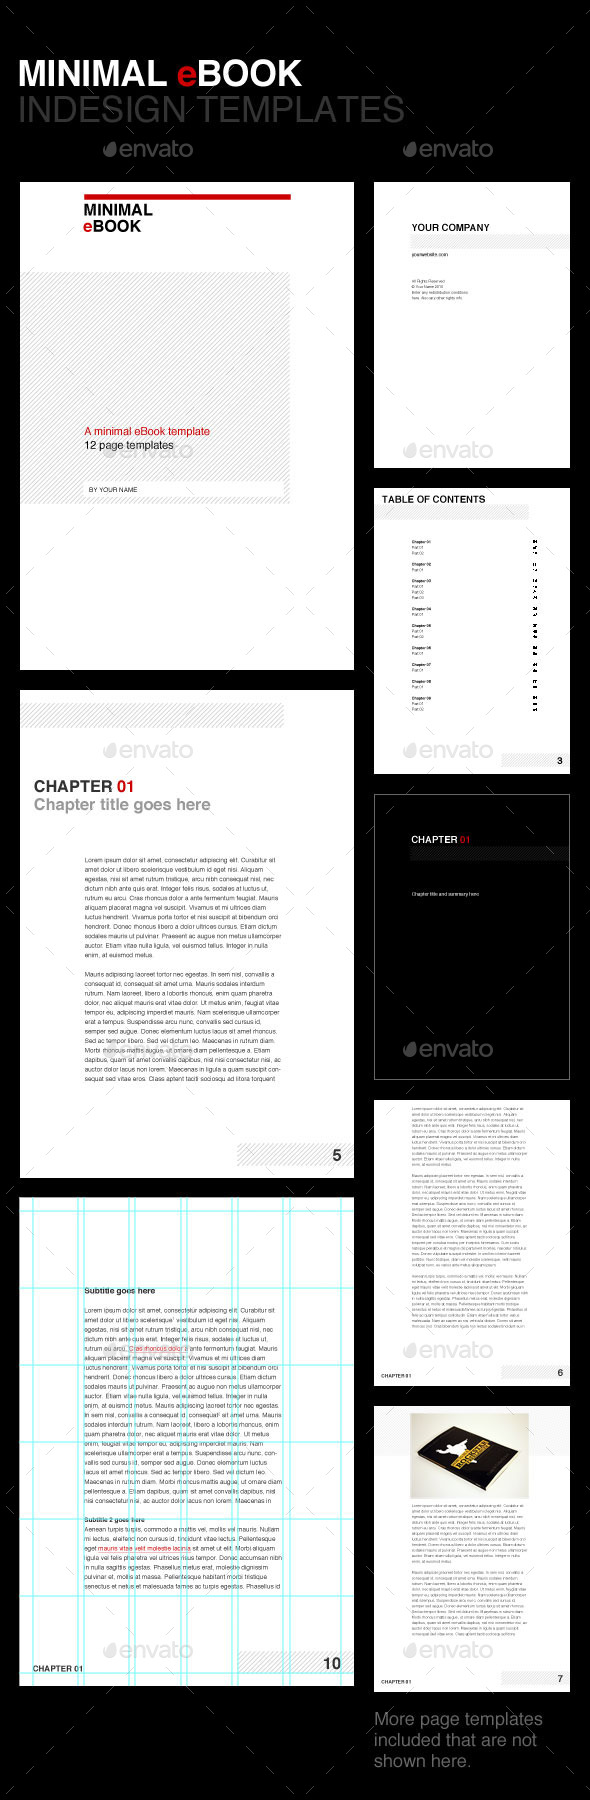 Minimal Ebook Template By Cardeo Graphicriver